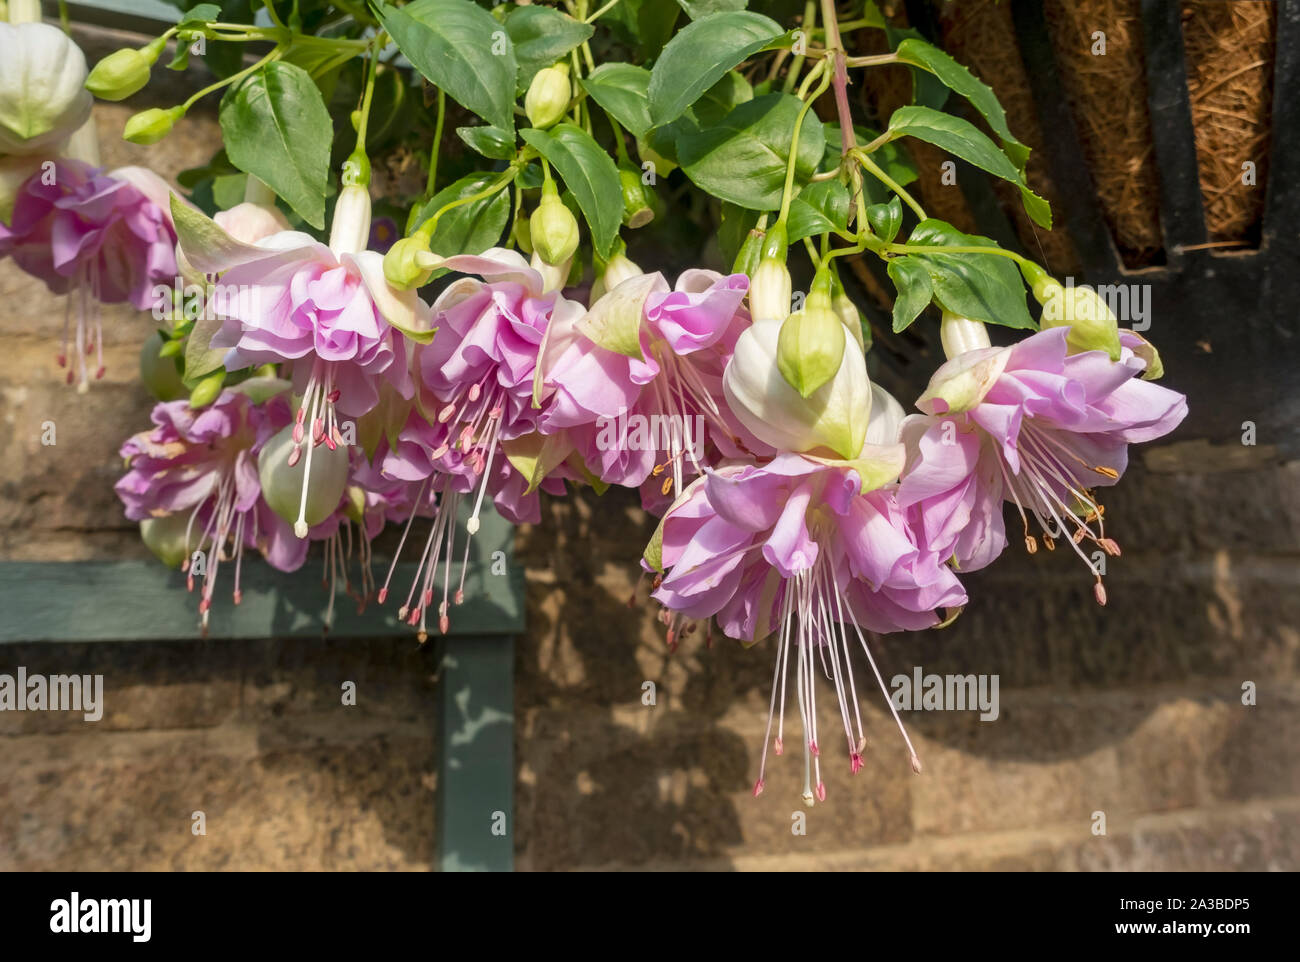 Close up of trailing fuchsias fuchsia pink flower flowers in a hanging basket on wall in summer England UK United Kingdom GB Great Britain Stock Photo